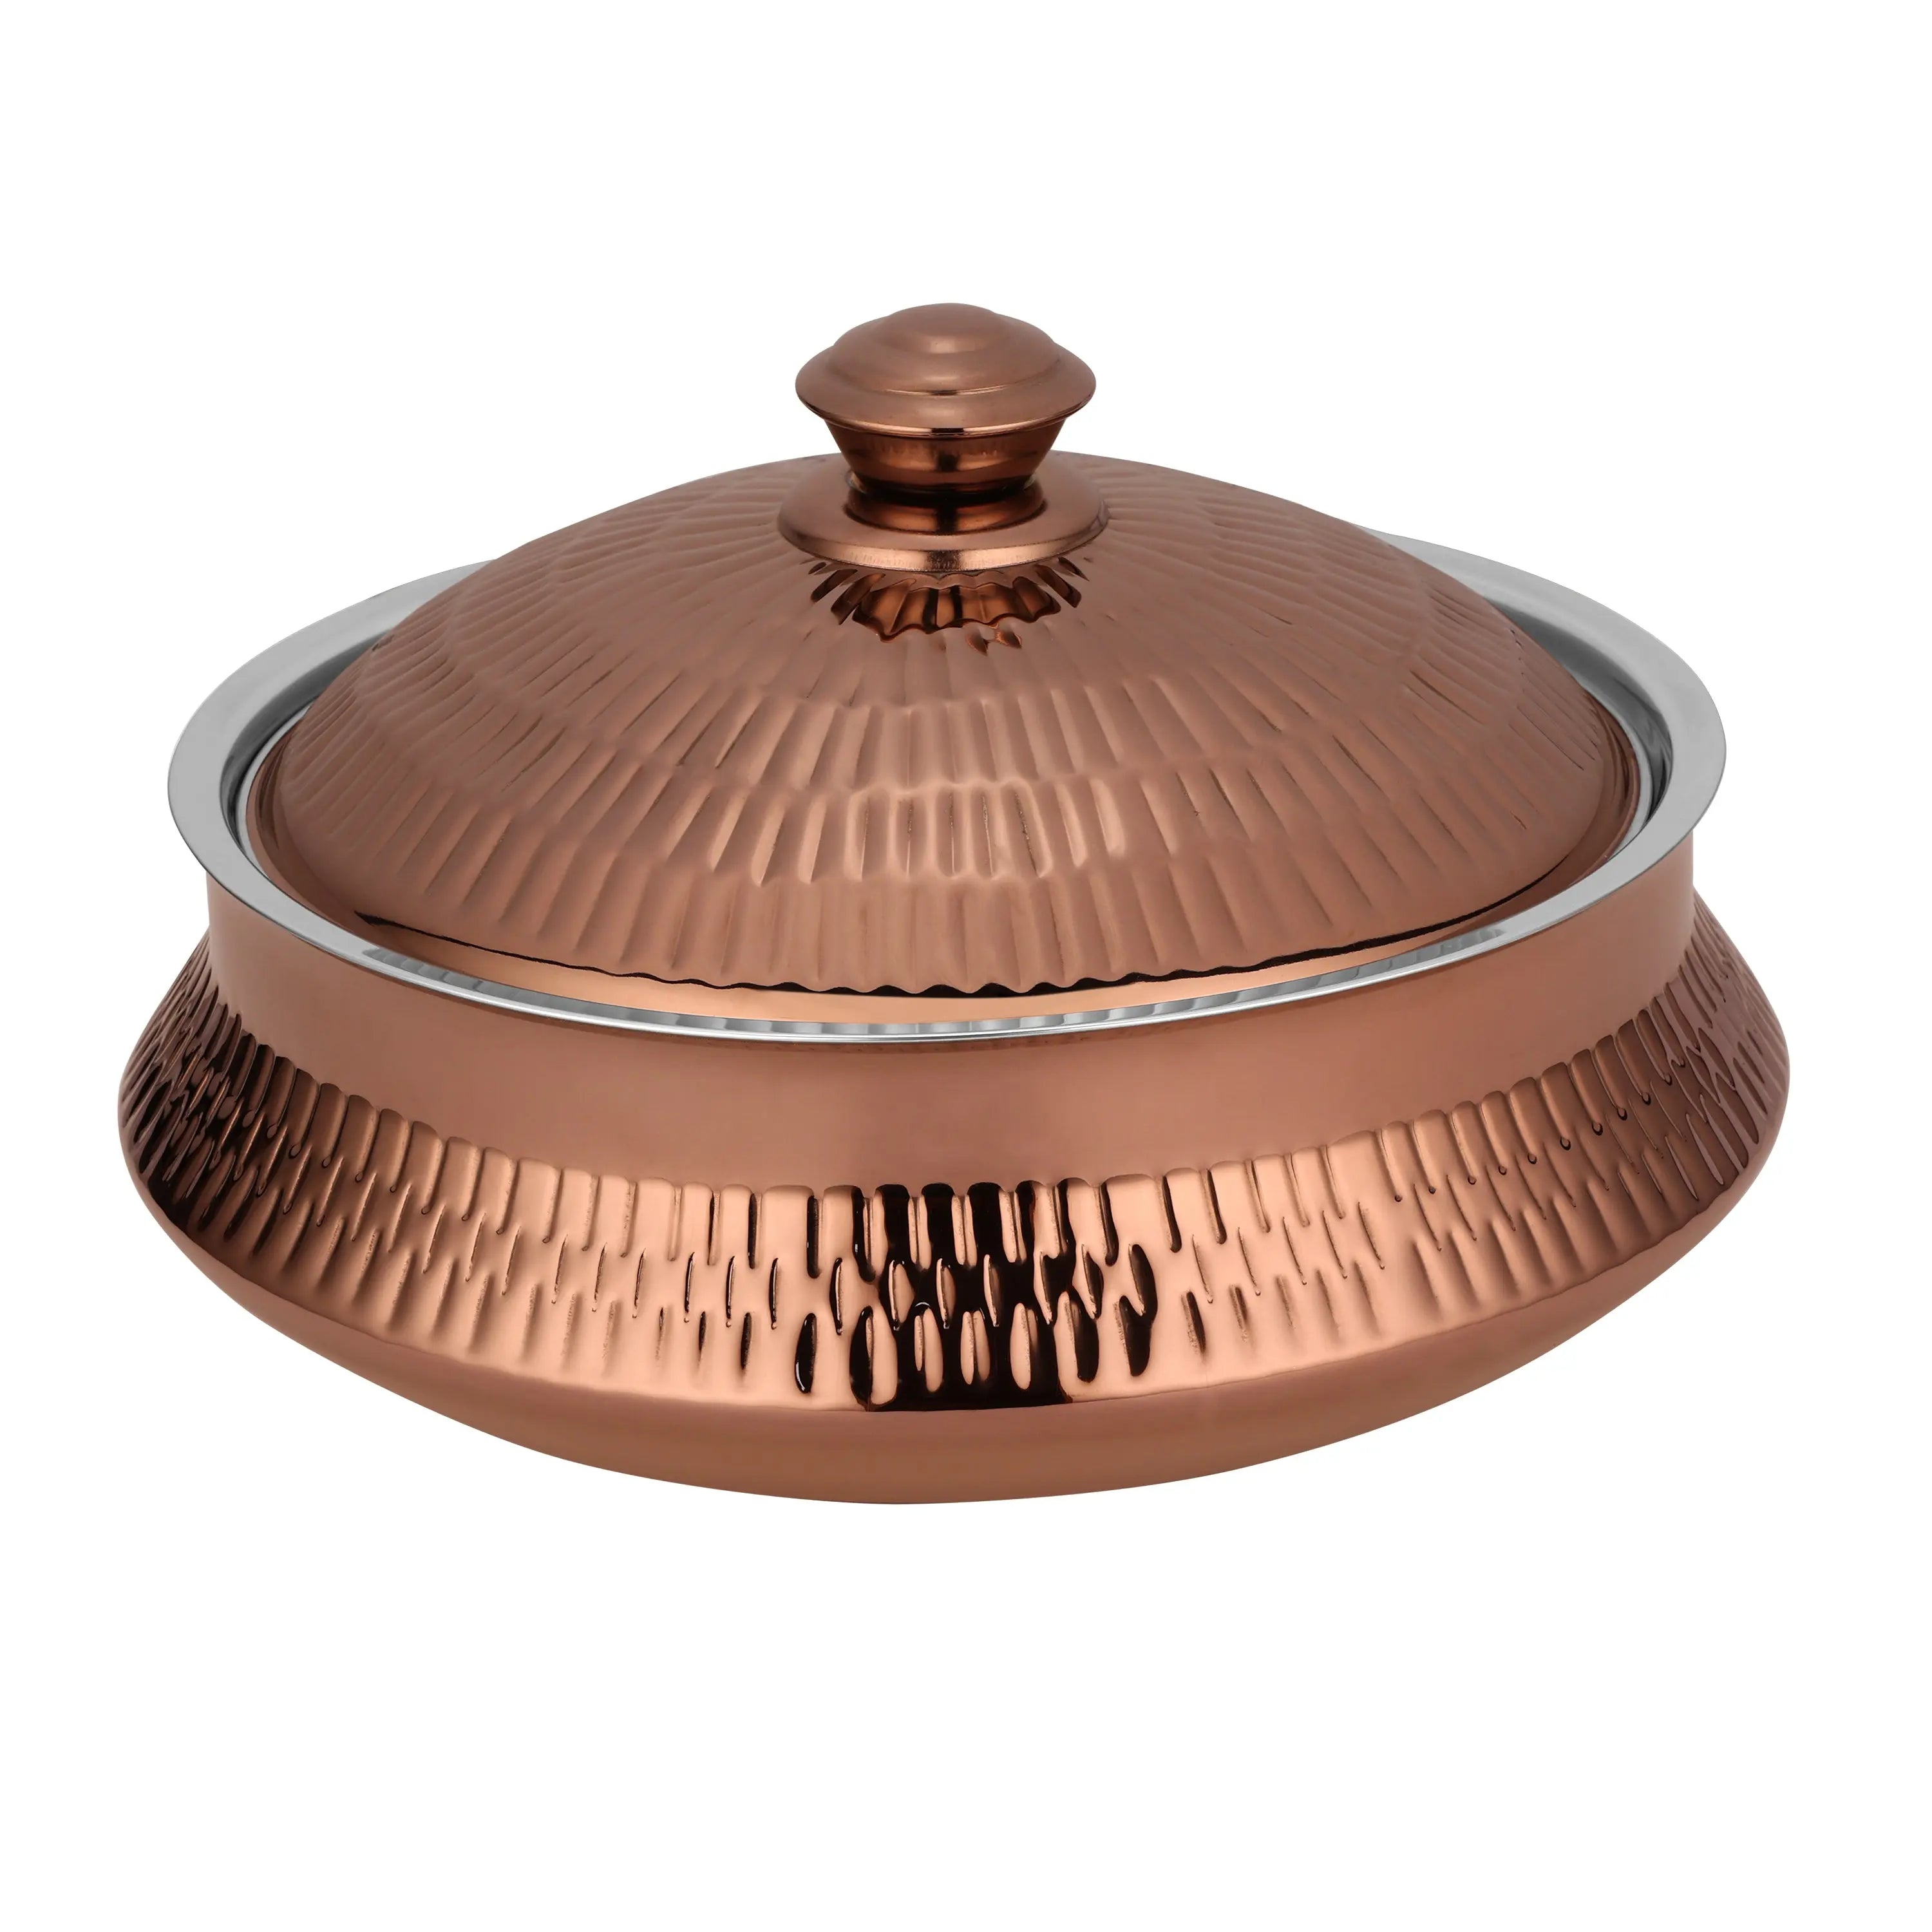 STAINLESS STEEL CASSEROLE MILANO ROSE GOLD - CROCKERY WALA AND COMPANY 